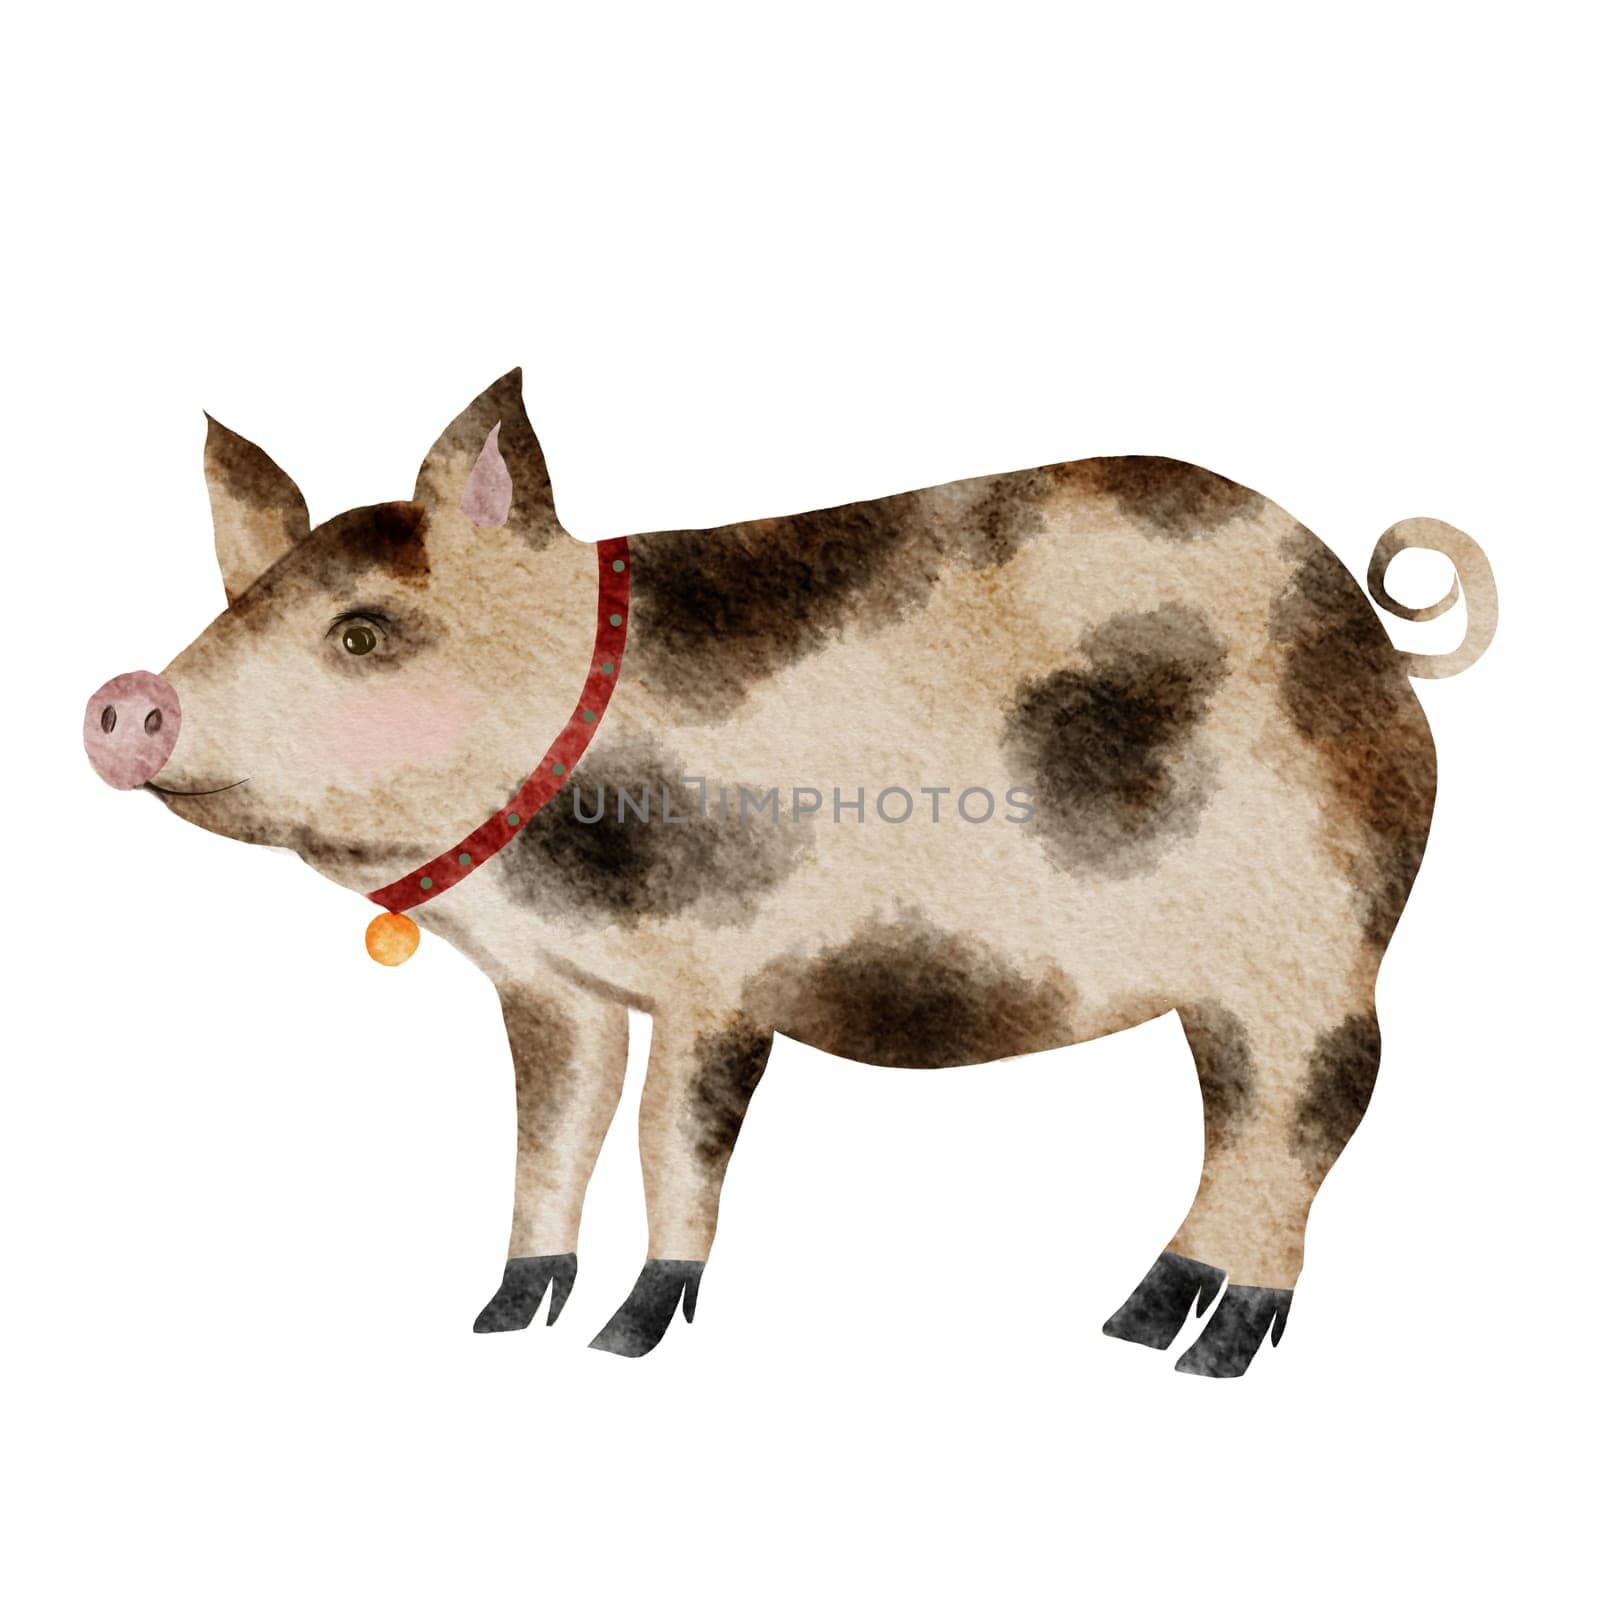 Watercolor drawing of a multi-colored cute pig. Isolate vintage pig with medallion on white background. For printing on posters and children's cards.